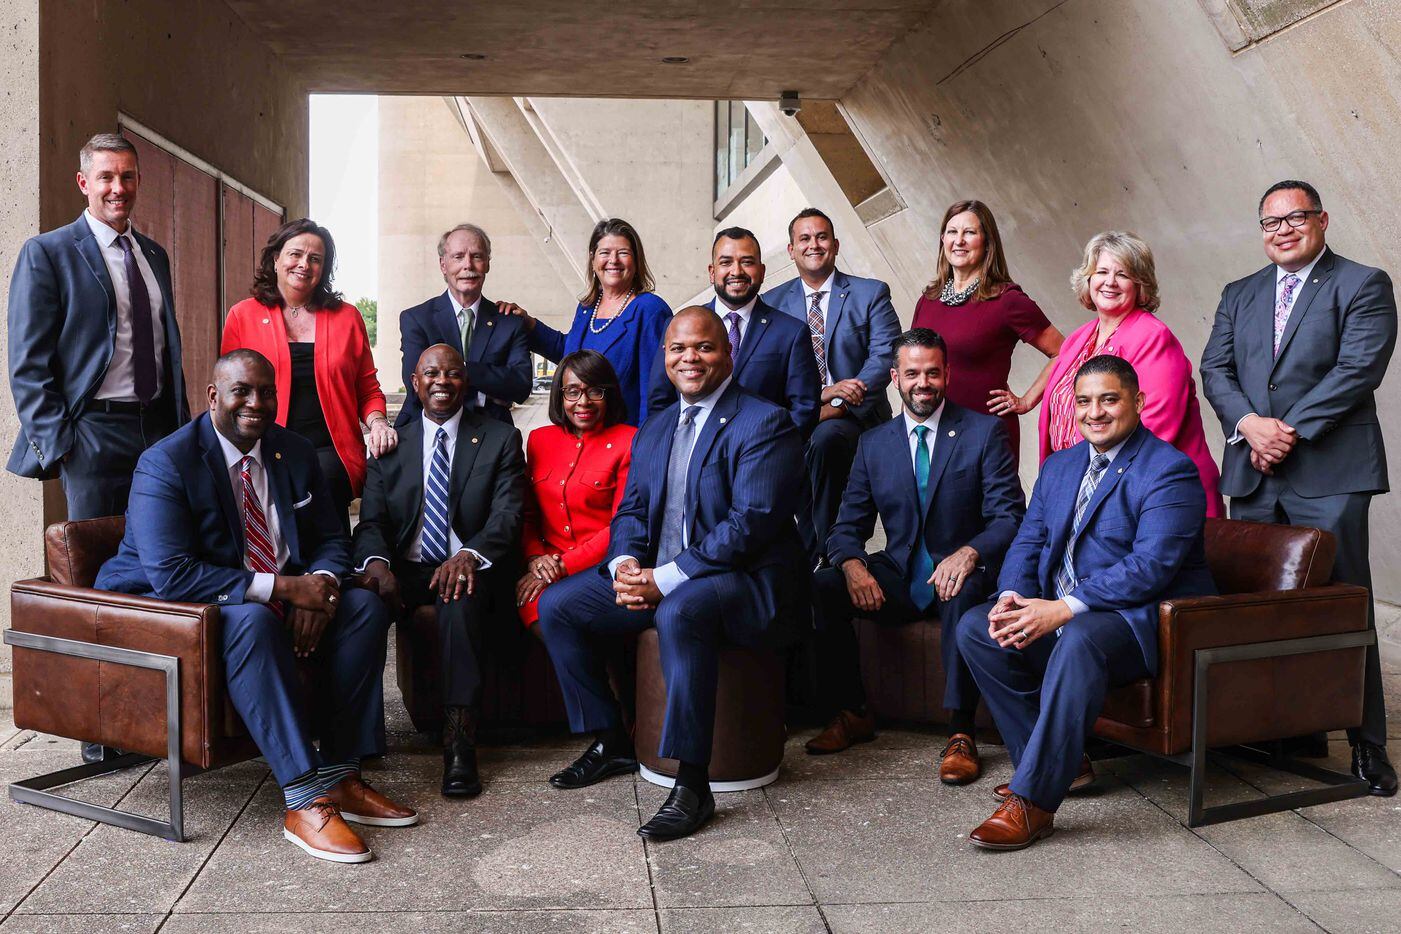 Recently elected Dallas City Council members pose together with Mayor Eric Johnson at the City Hall in Dallas on Monday, June 14, 2021, after their Inauguration ceremony. (Lola Gomez/The Dallas Morning News)